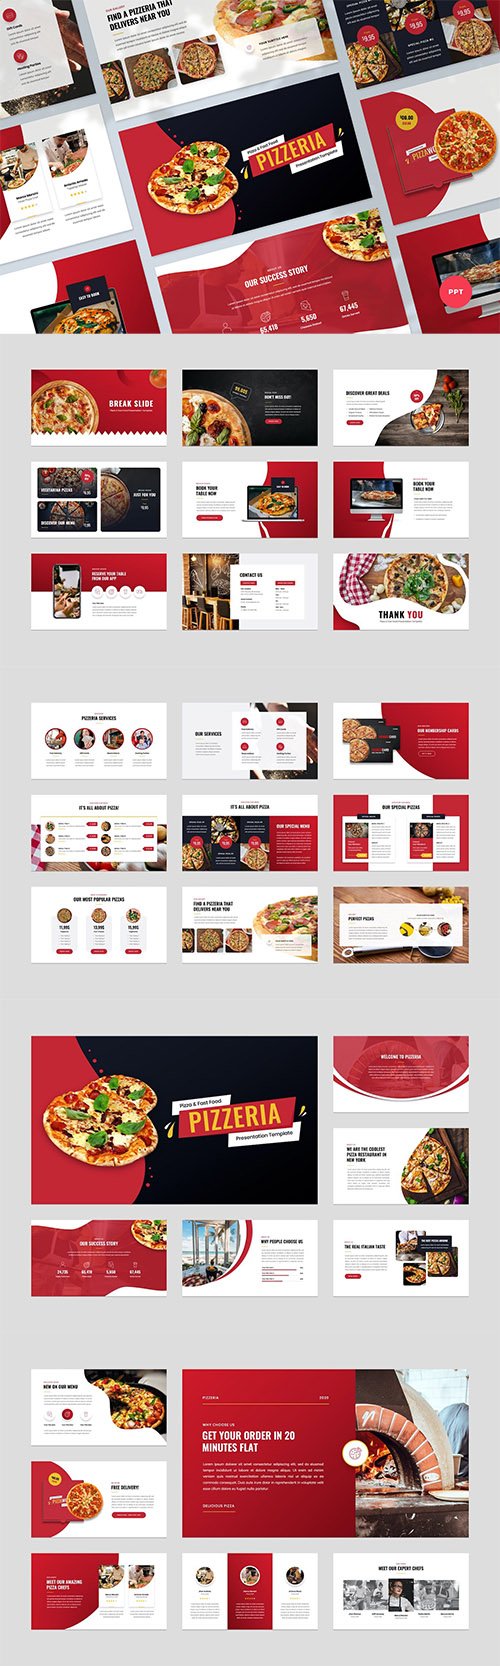 Pizza and Fast Food Presentation Template